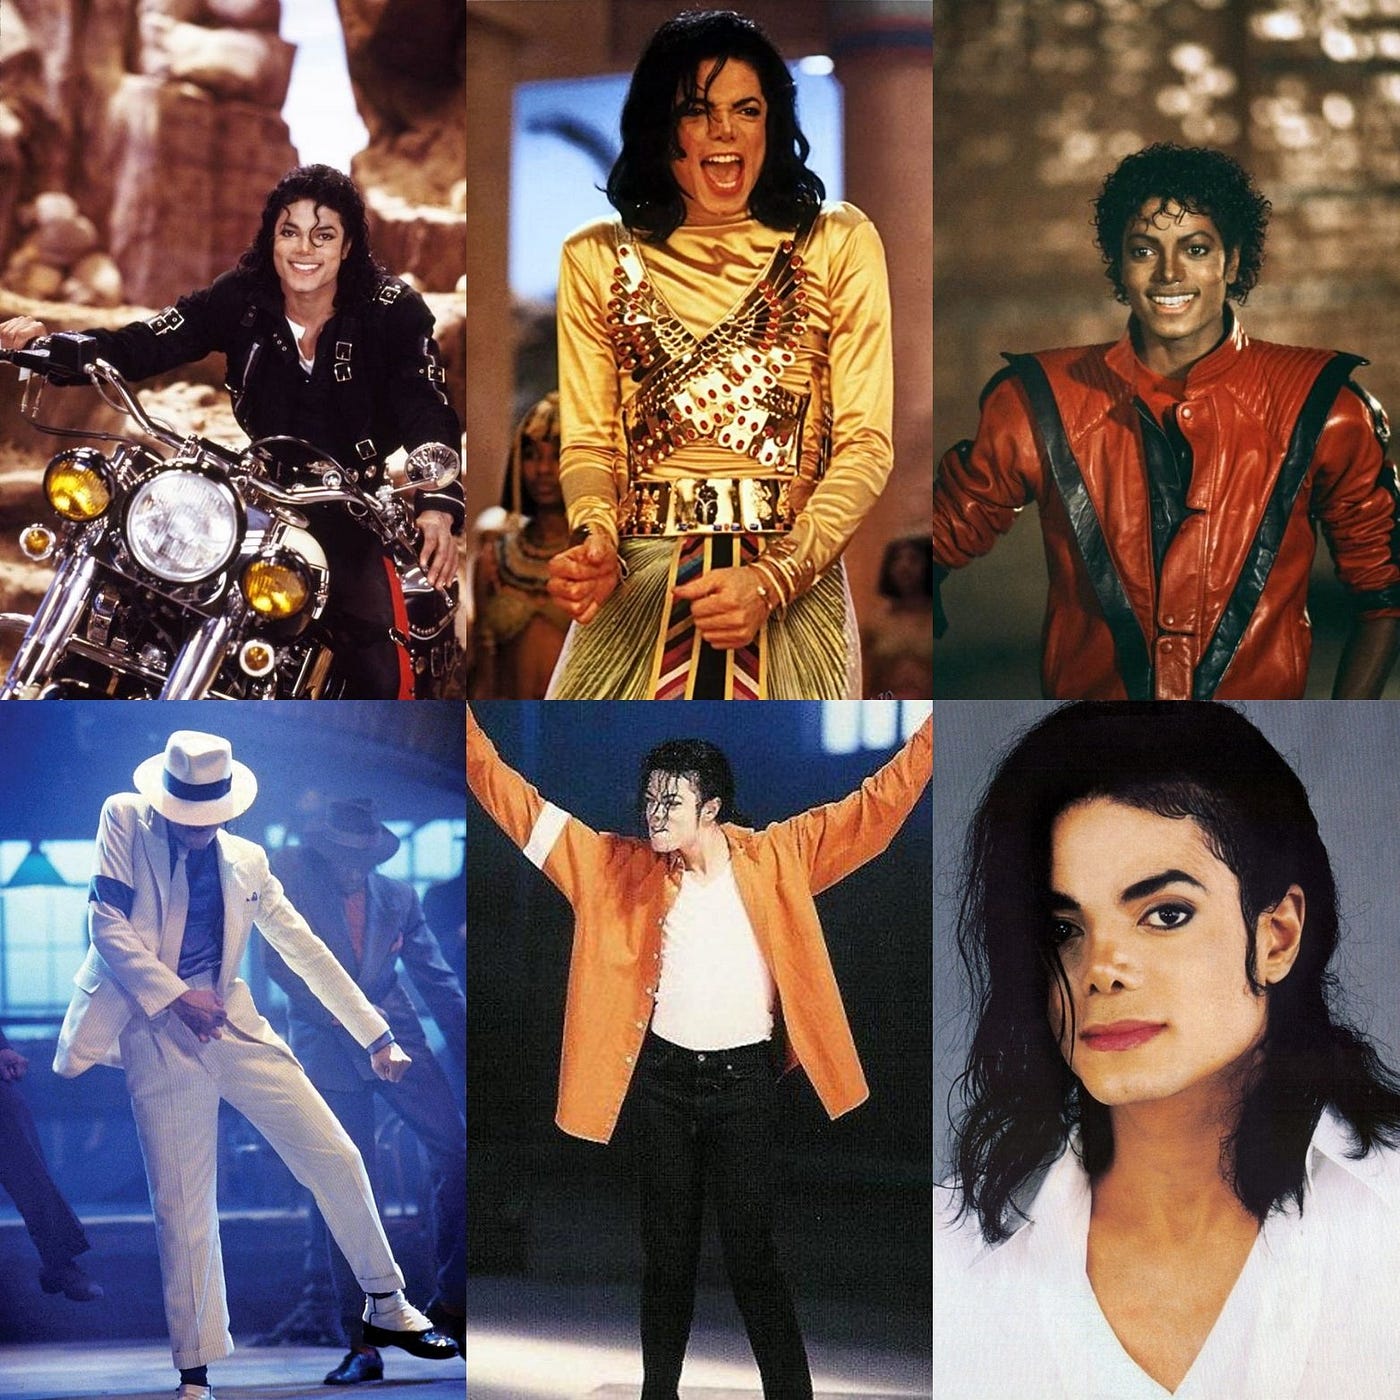 Michael Jackson Wasn't Only The King of Pop — He Was The King of